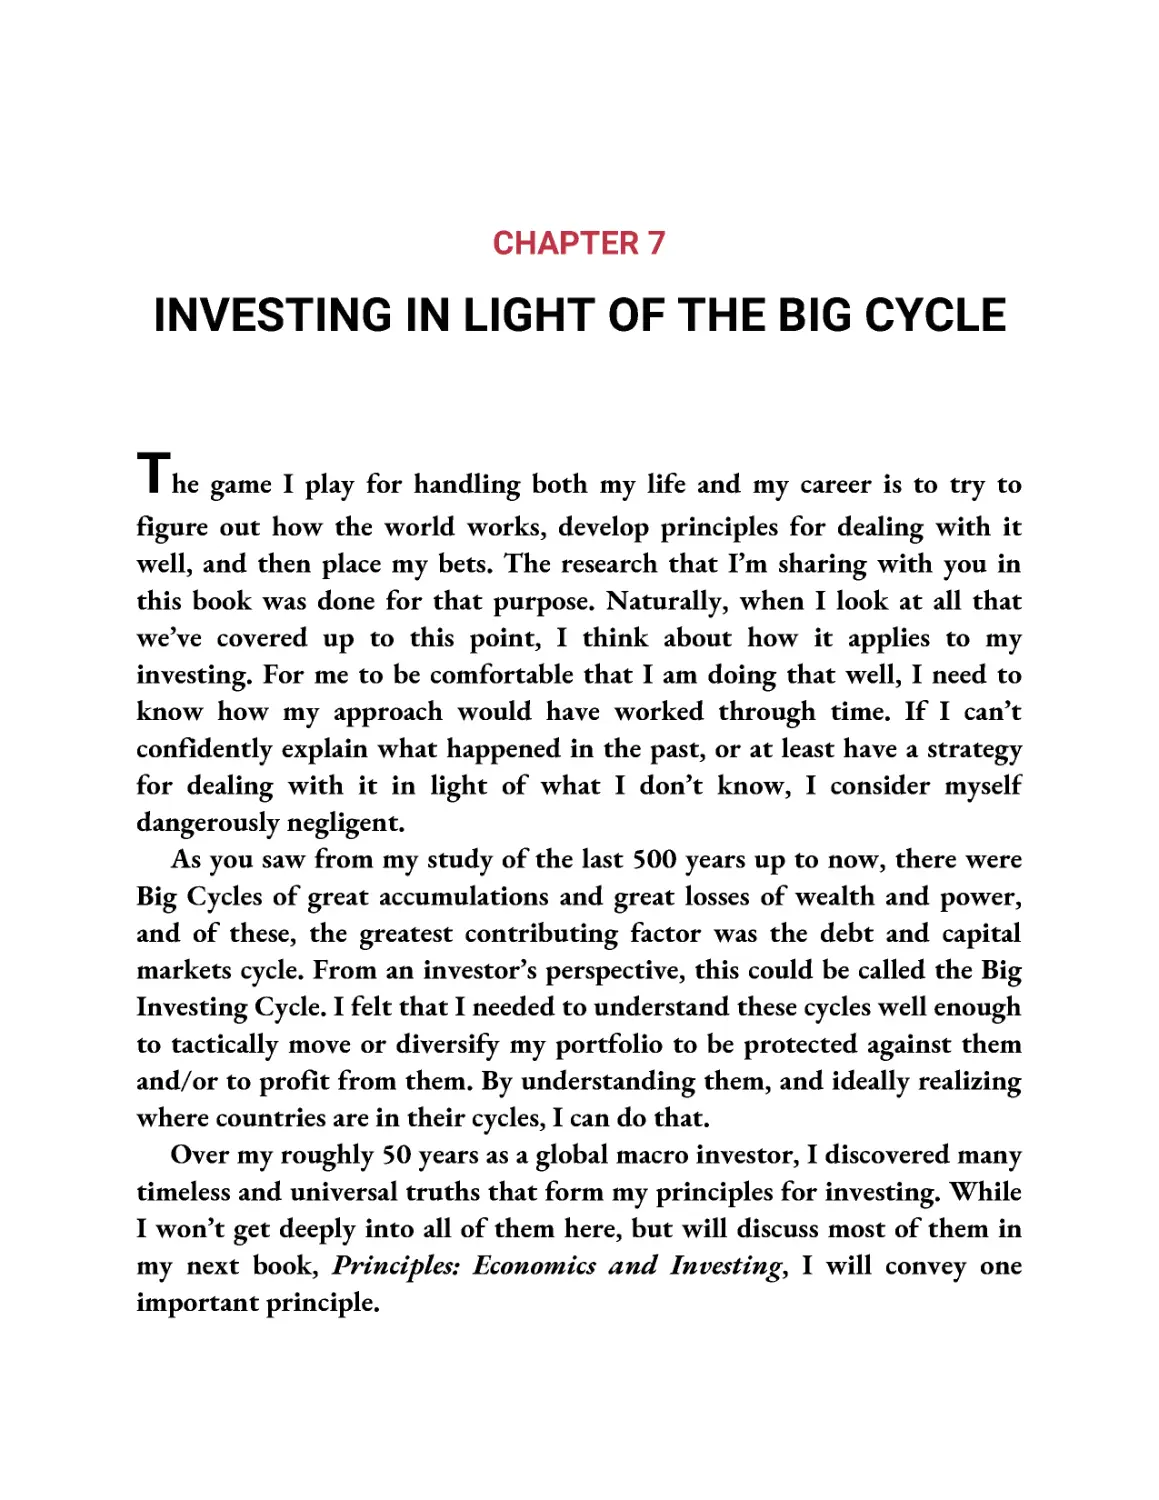 ﻿Chapter 7: Investing in Light of the Big Cycl